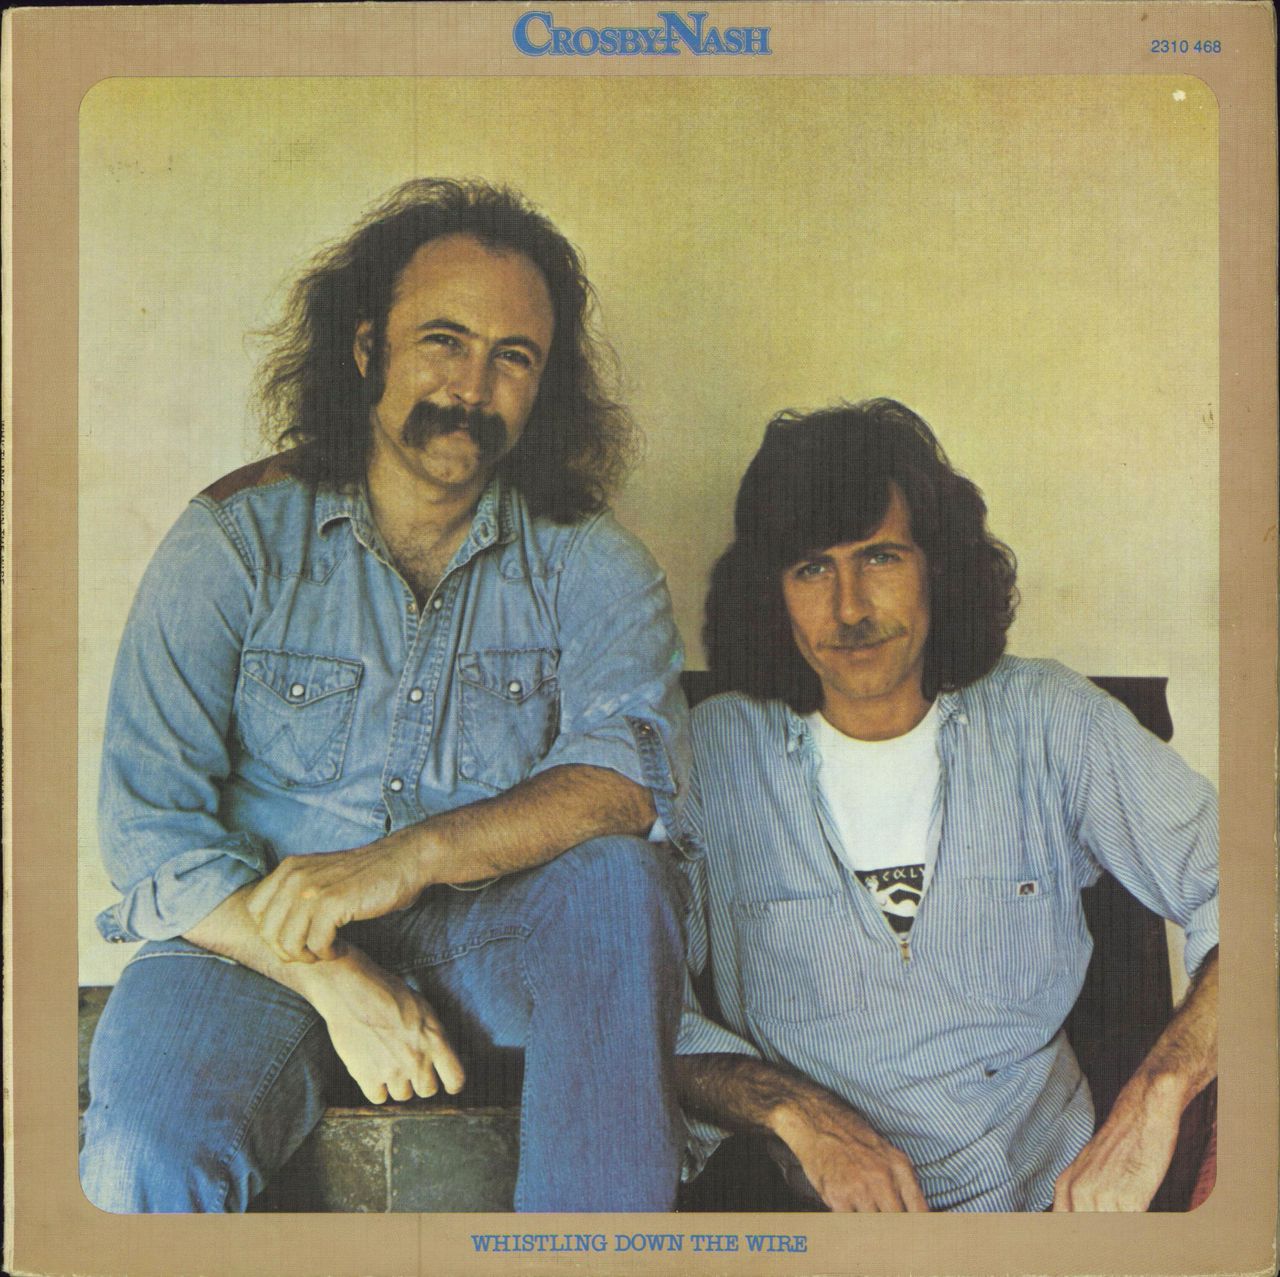 David Crosby & Graham Nash Whistling Down The Wire South African vinyl LP album (LP record) 2310468